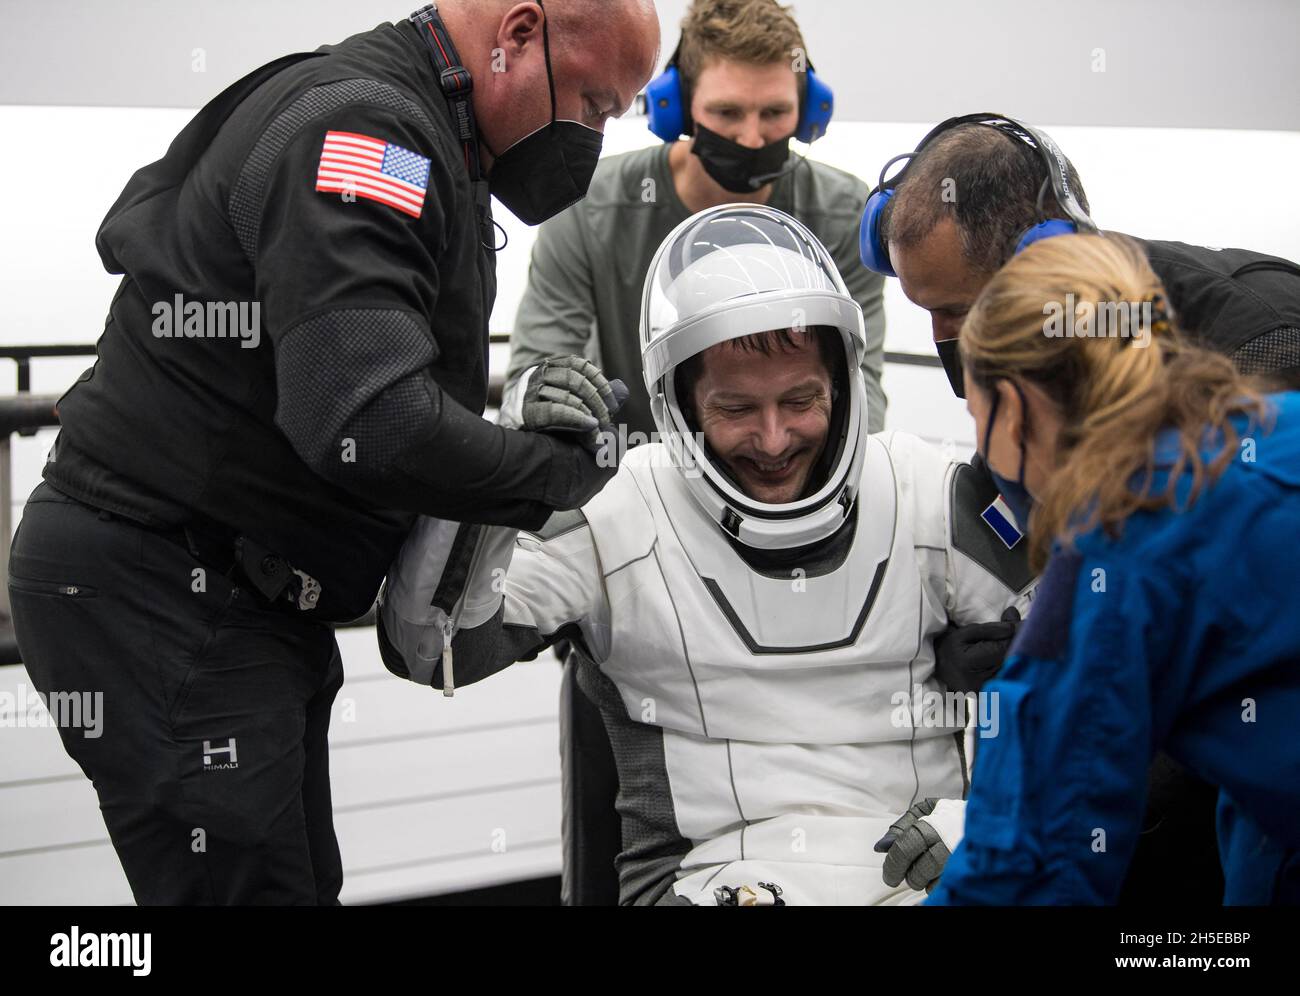 ESA (European Space Agency) astronaut Thomas Pesquet is helped out of the SpaceX Crew Dragon Endeavour spacecraft onboard the SpaceX GO Navigator recovery ship after he and NASA astronauts Shane Kimbrough and Megan McArthur, and Japan Aerospace Exploration Agency (JAXA) astronaut Aki Hoshide landed in the Gulf of Mexico off the coast of Pensacola, Florida, Monday, Nov. 8, 2021. NASA’s SpaceX Crew-2 mission is the second operational mission of the SpaceX Crew Dragon spacecraft and Falcon 9 rocket to the International Space Station as part of the agency’s Commercial Crew Program. Photo by Aubrey Stock Photo